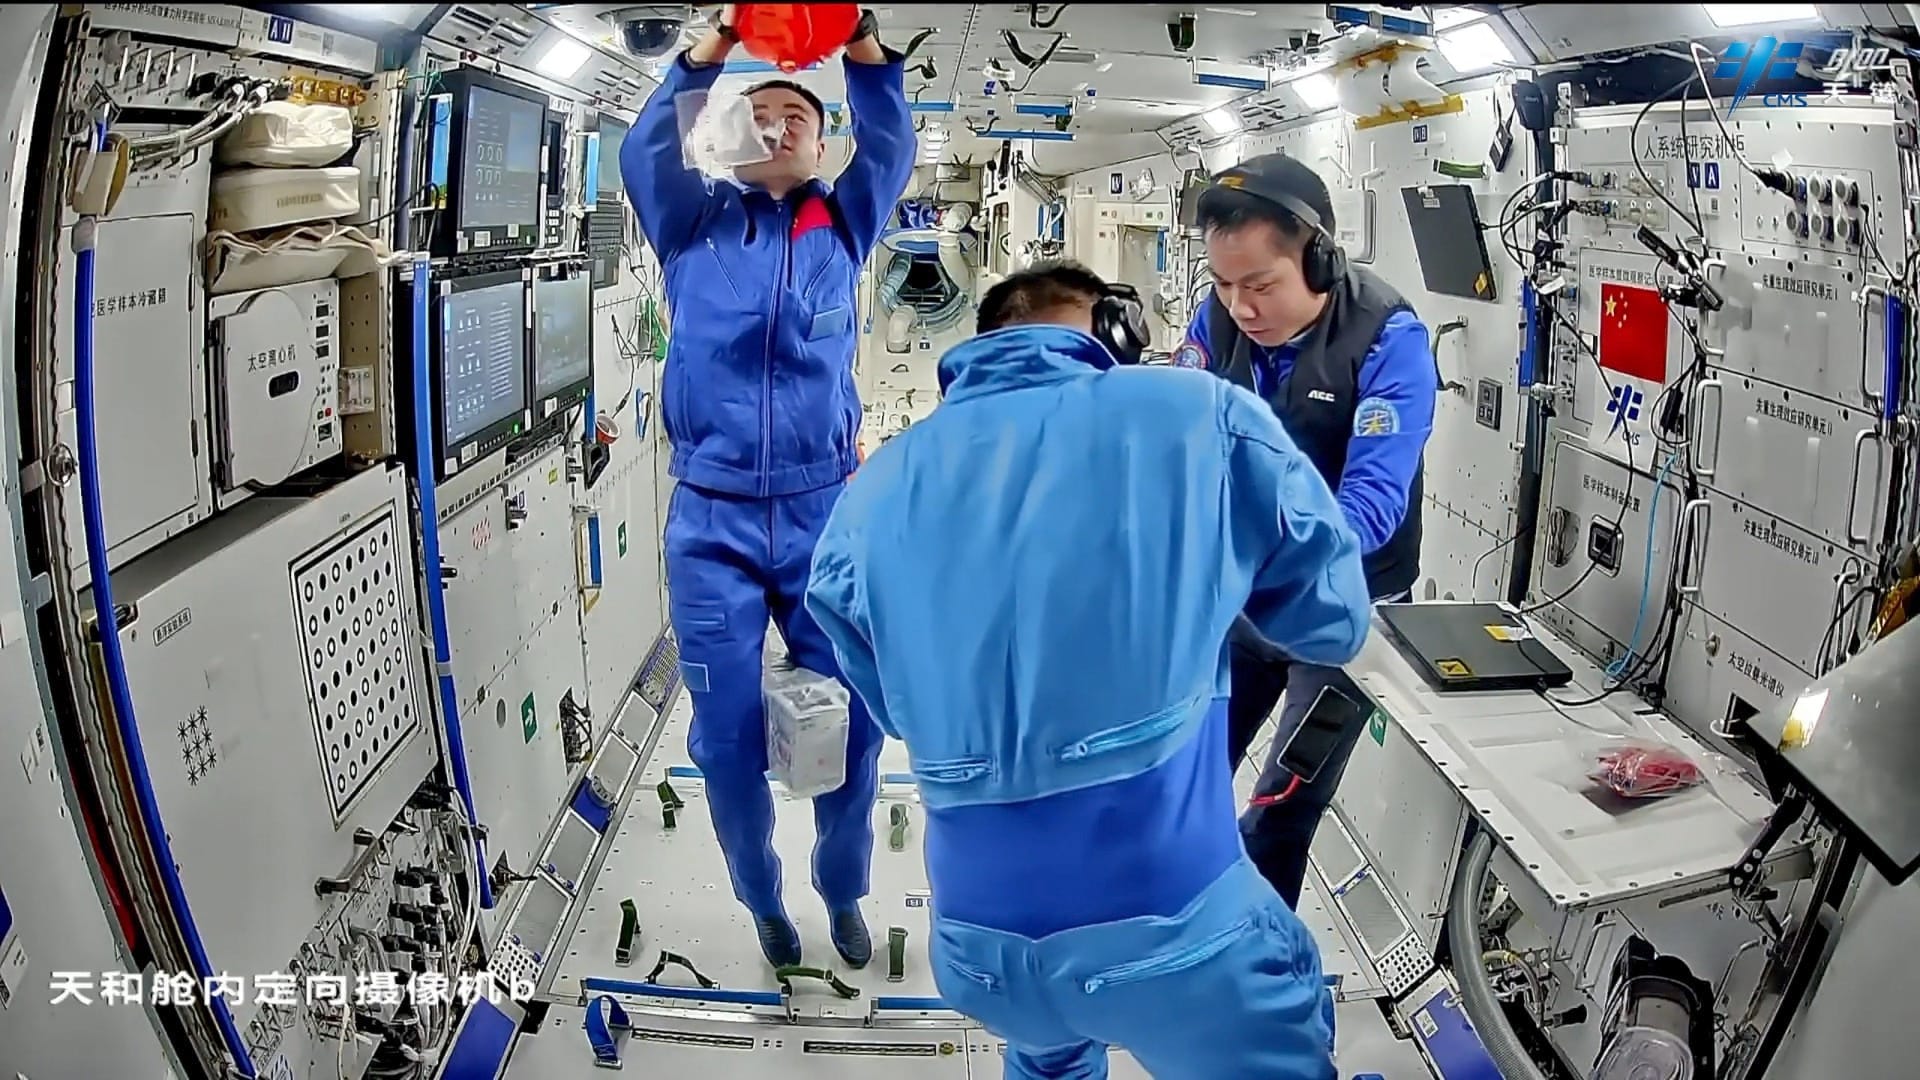 The crew of the Shenzhou 17 mission decorating the inside of the Tiangong space station. ©China Manned Space Agency